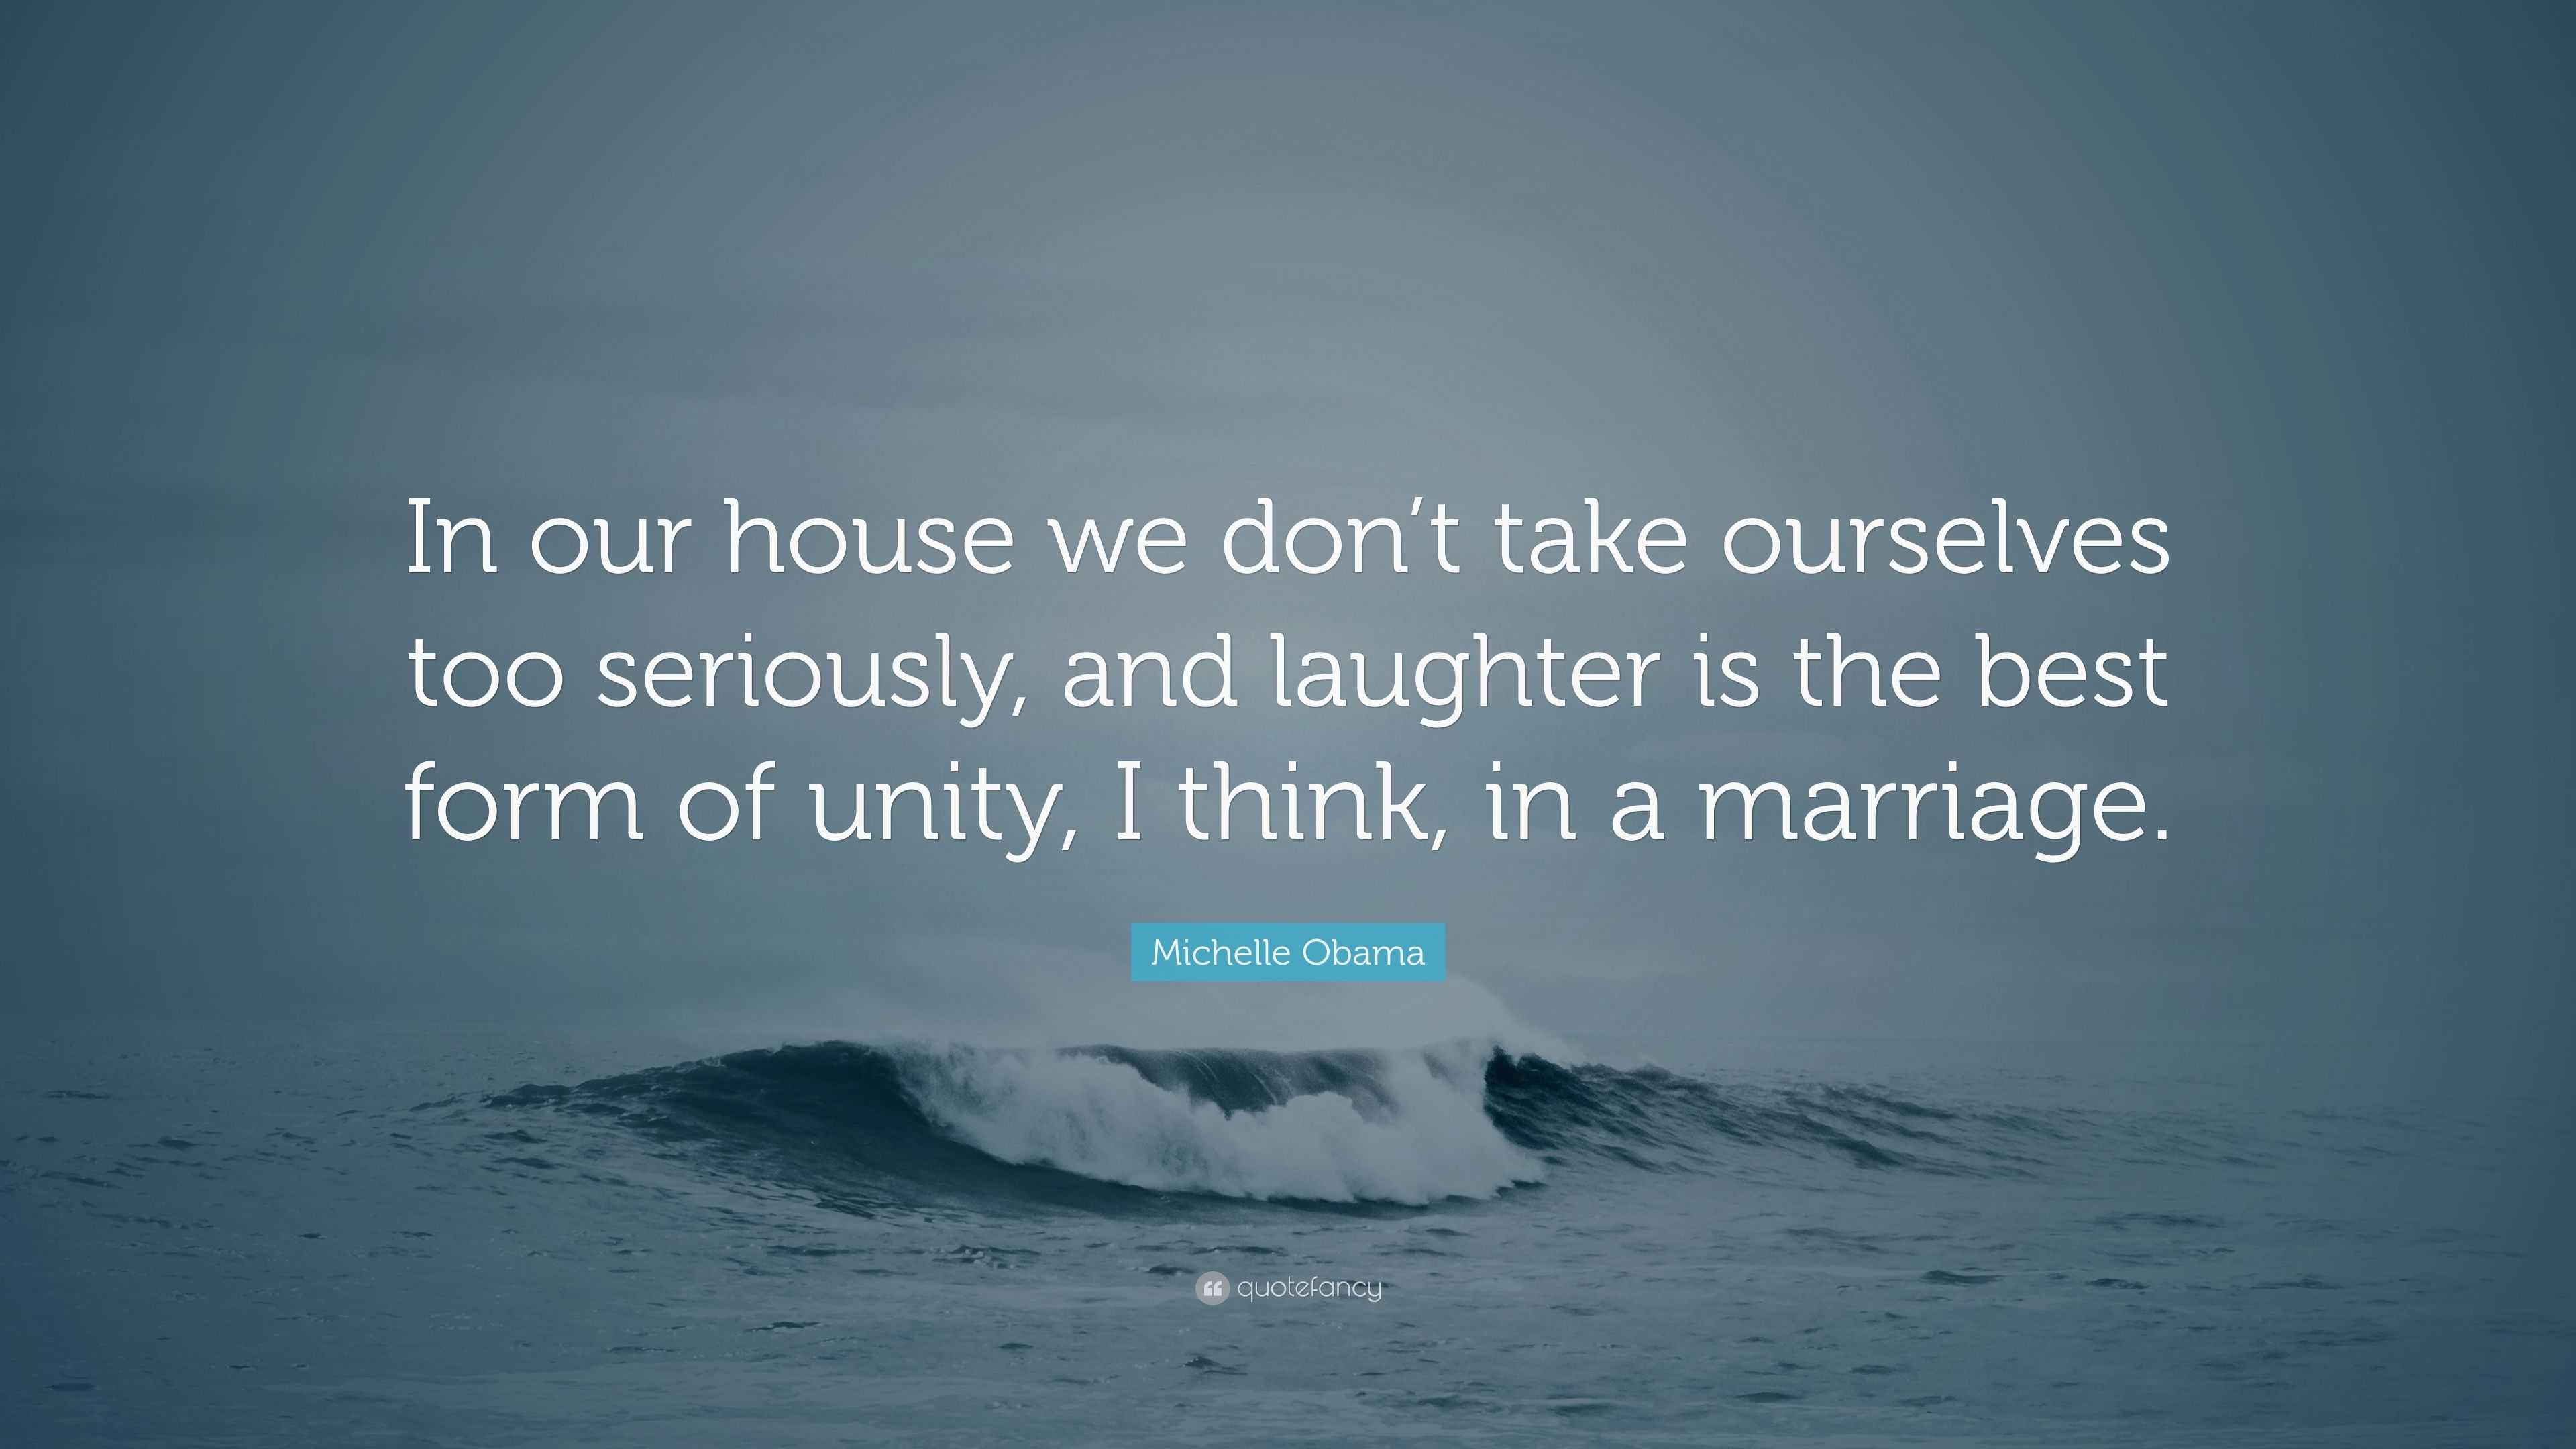 This Is Our House: Inspirational Quotes